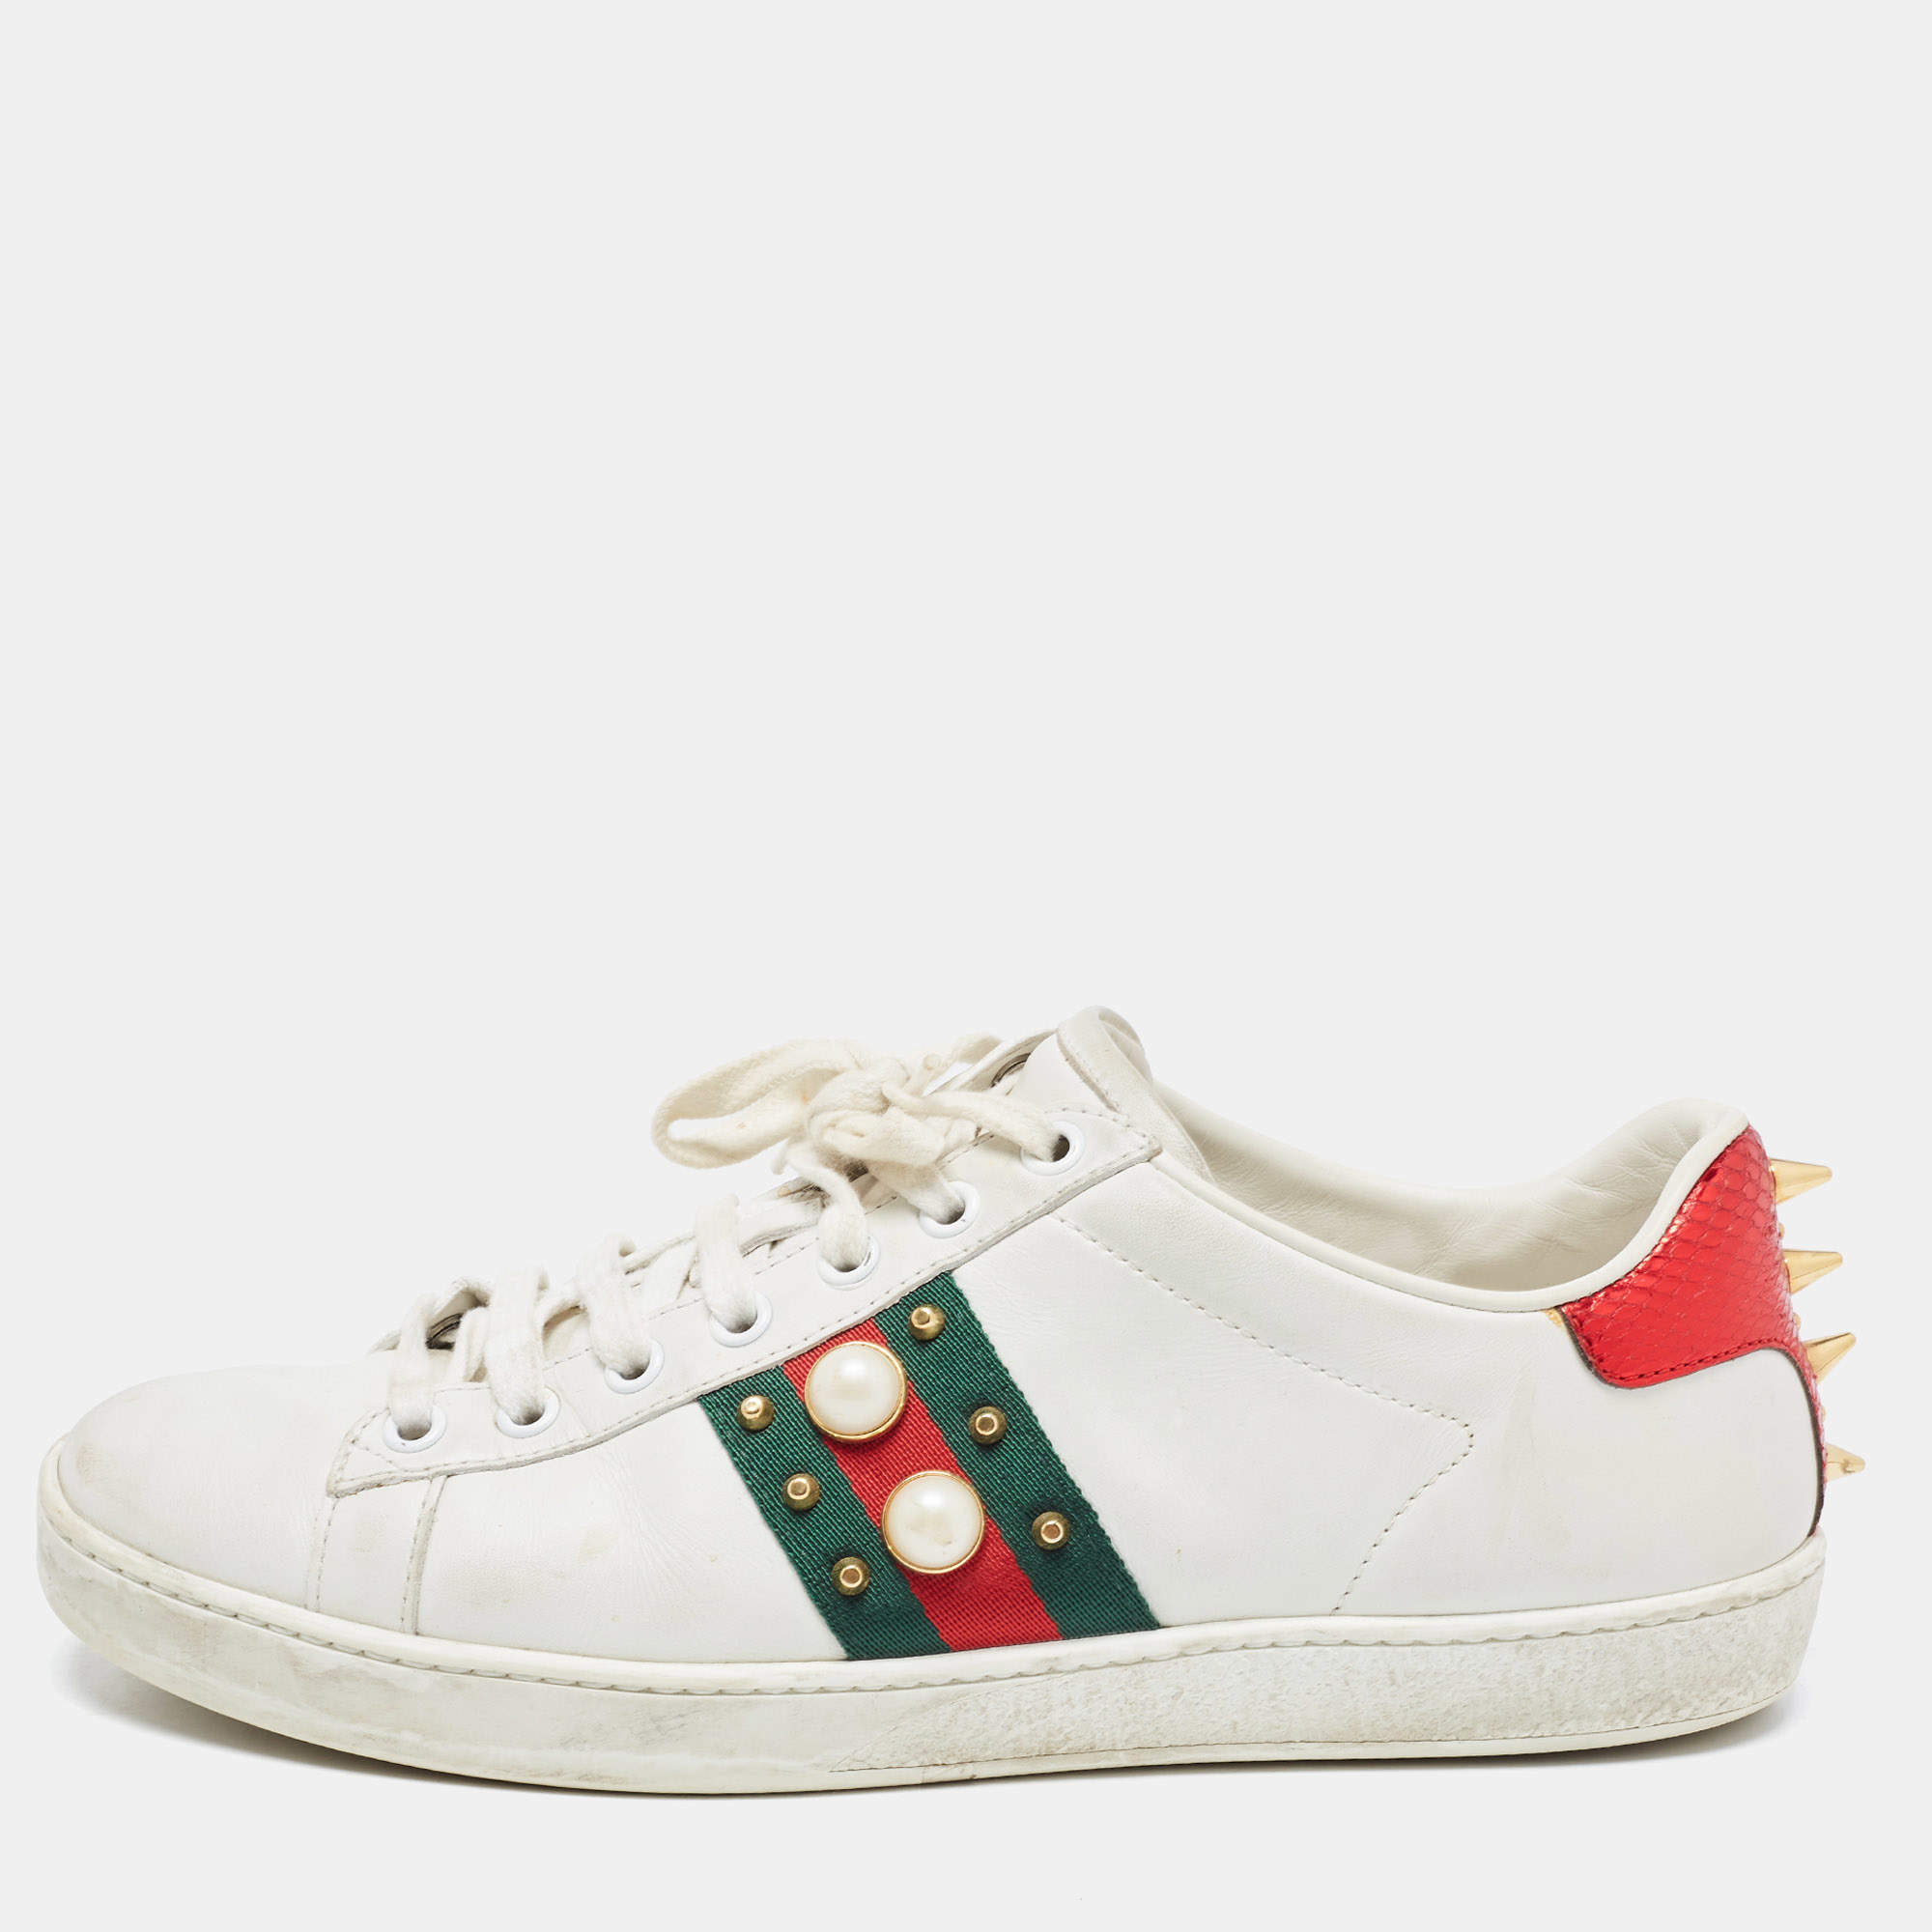 Gucci Shoes Women's Ace Golden Bees Supreme Leather Sneakers White Size 7  us | eBay